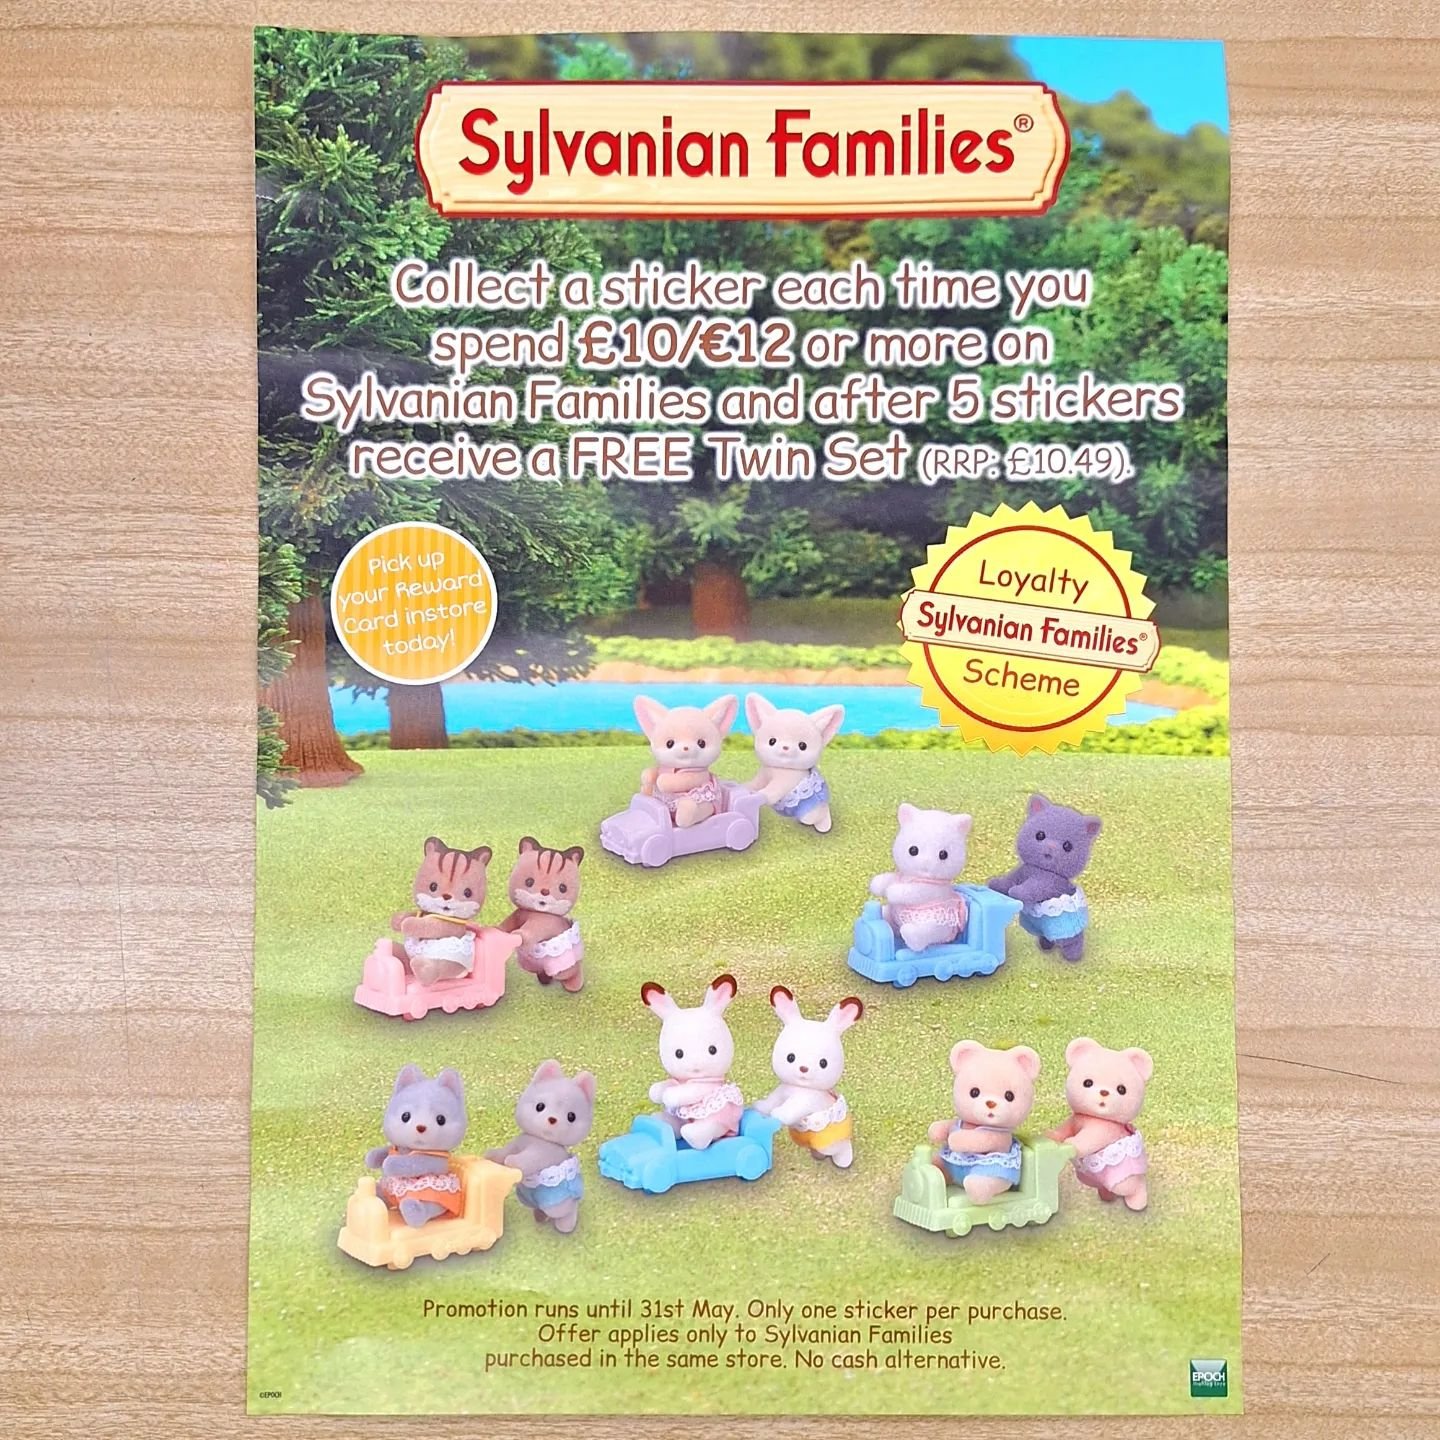 🐰SYLVANIAN FAMILIES LOYALTY CARD🐰

We have an all NEW @sylvanianfamilies_uk  LOYALTY CARD for you!

All you have to do is...

🐹 Ask in store for your SYLVANIAN FAMILIES LOYALTY CARD.

🐻&zwj;❄️ Take a look at our large range of SYLVANIAN FAMILIES.